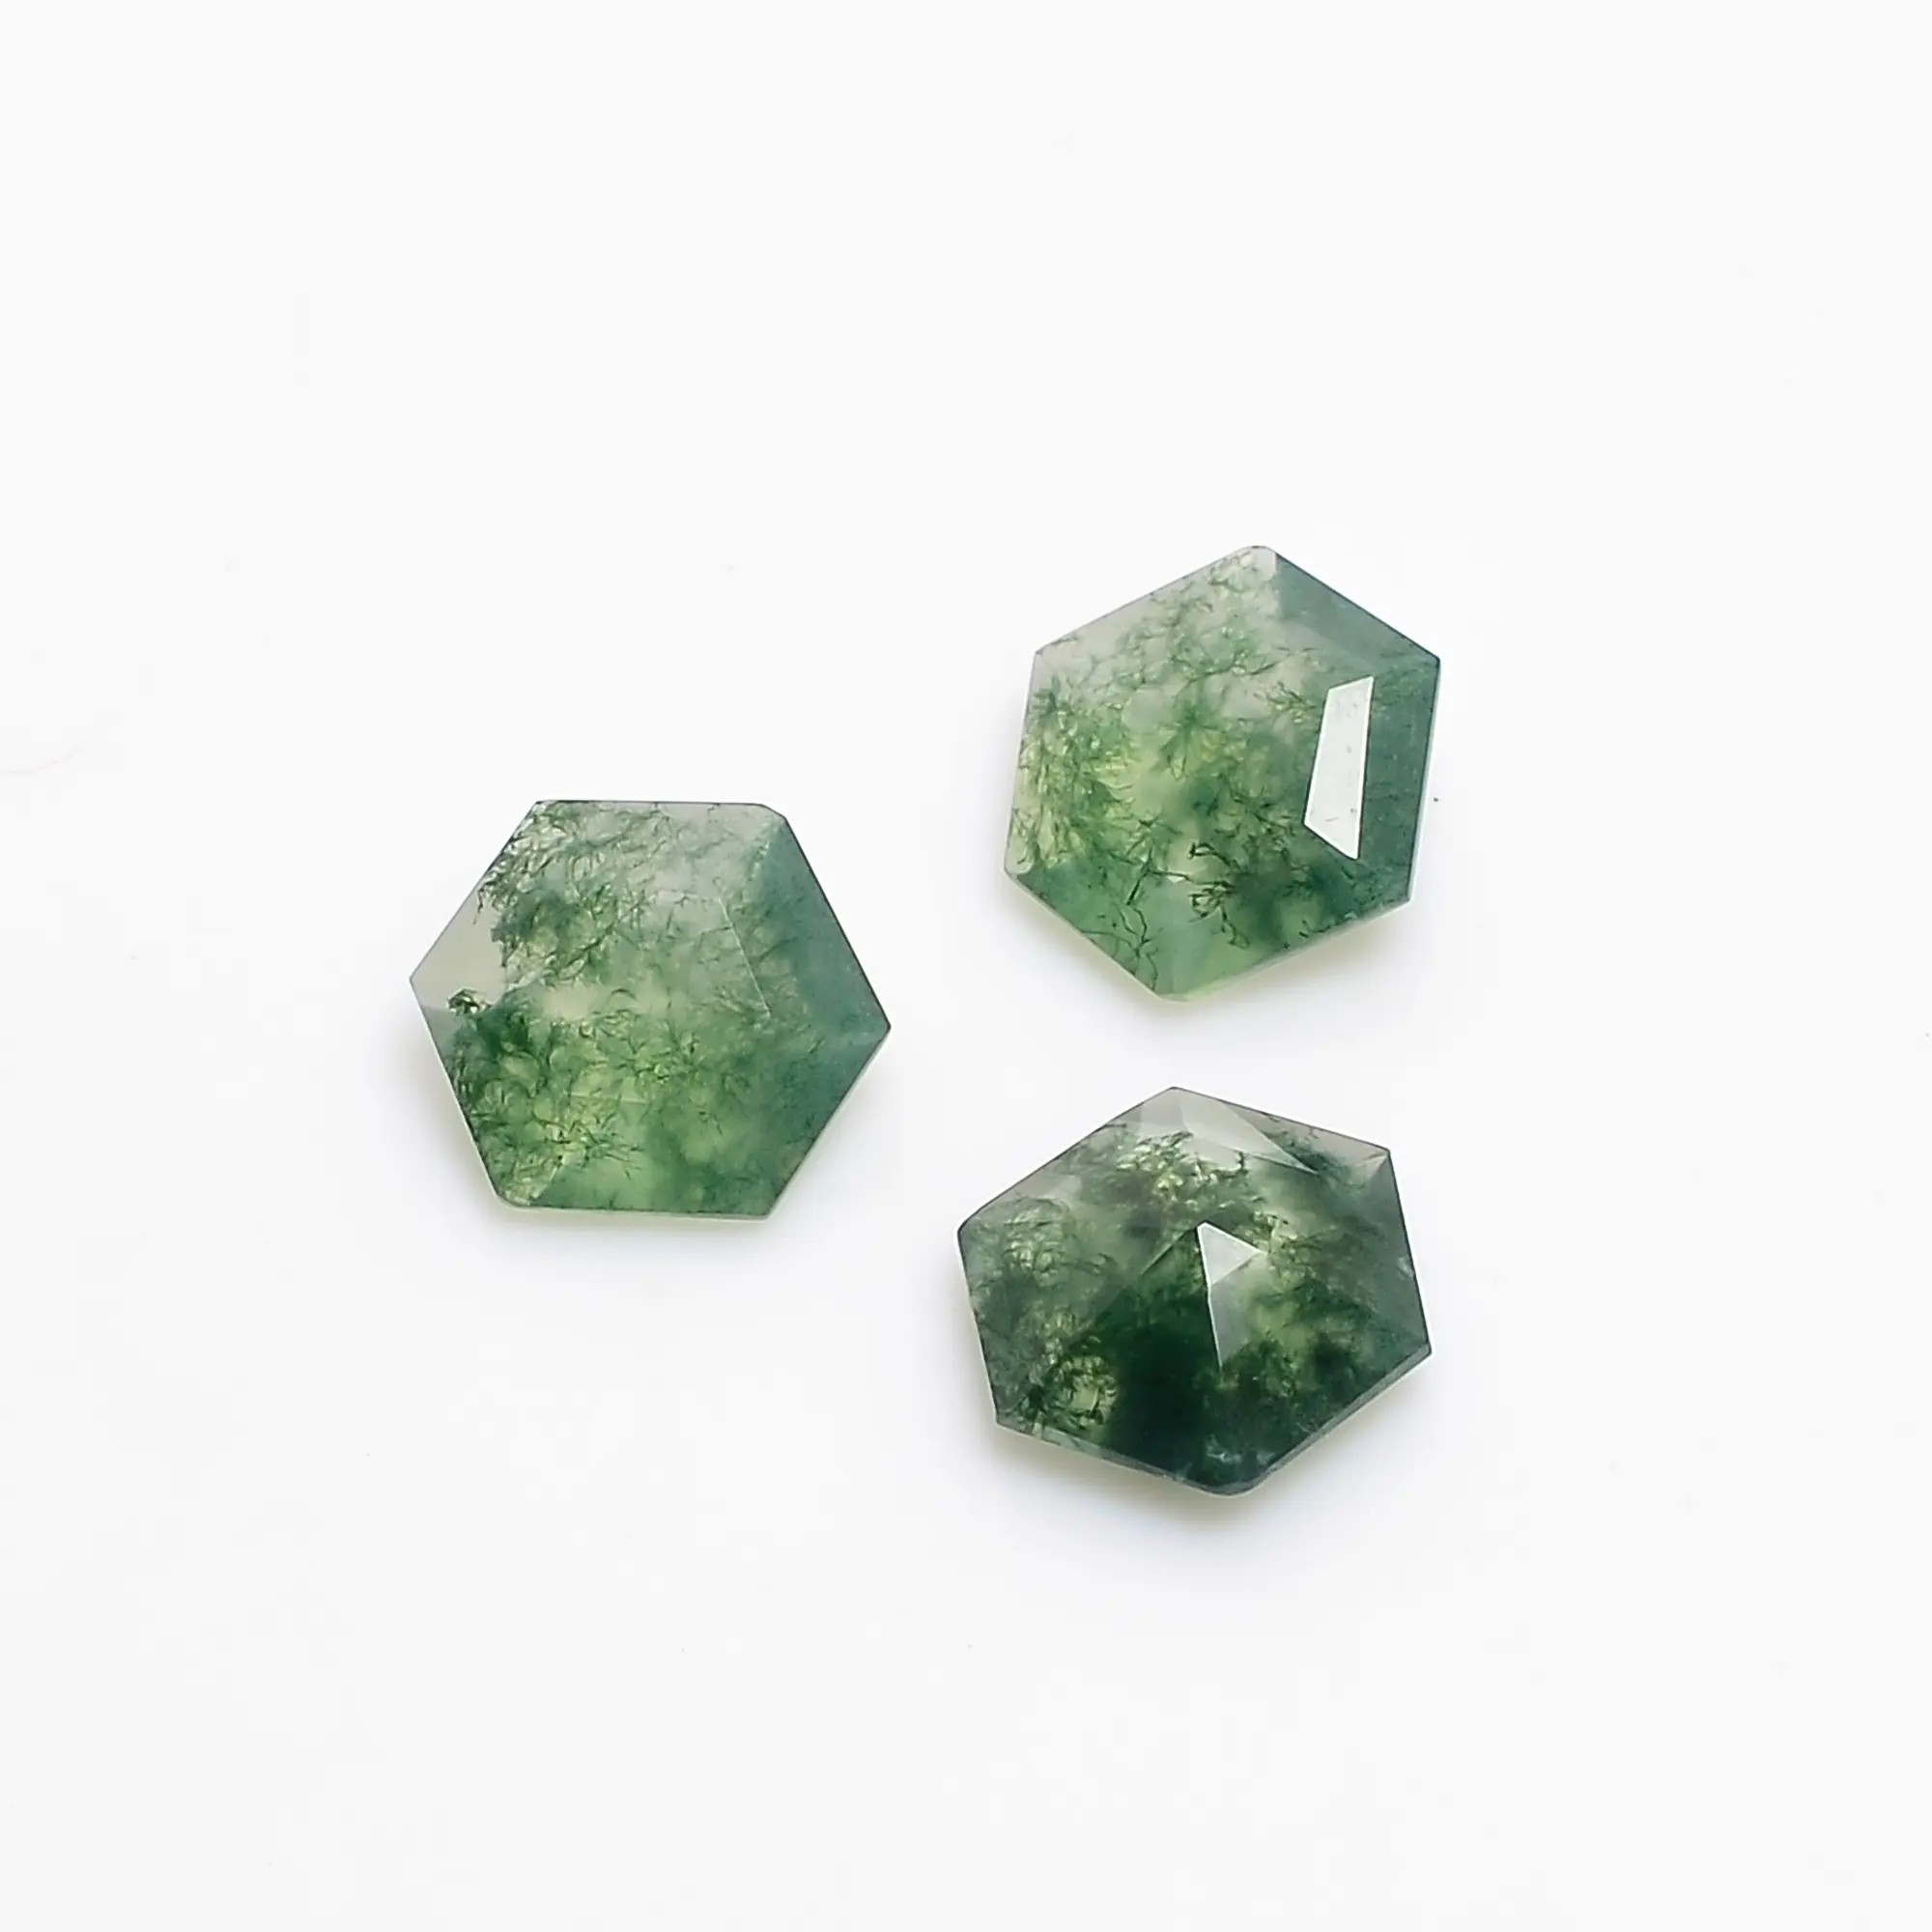 High Quality Natural Green Moss Agate Hexagon Shape Step Cut Loose Gemstone Wholesale Lot For Jewelry Making Calibrated Size